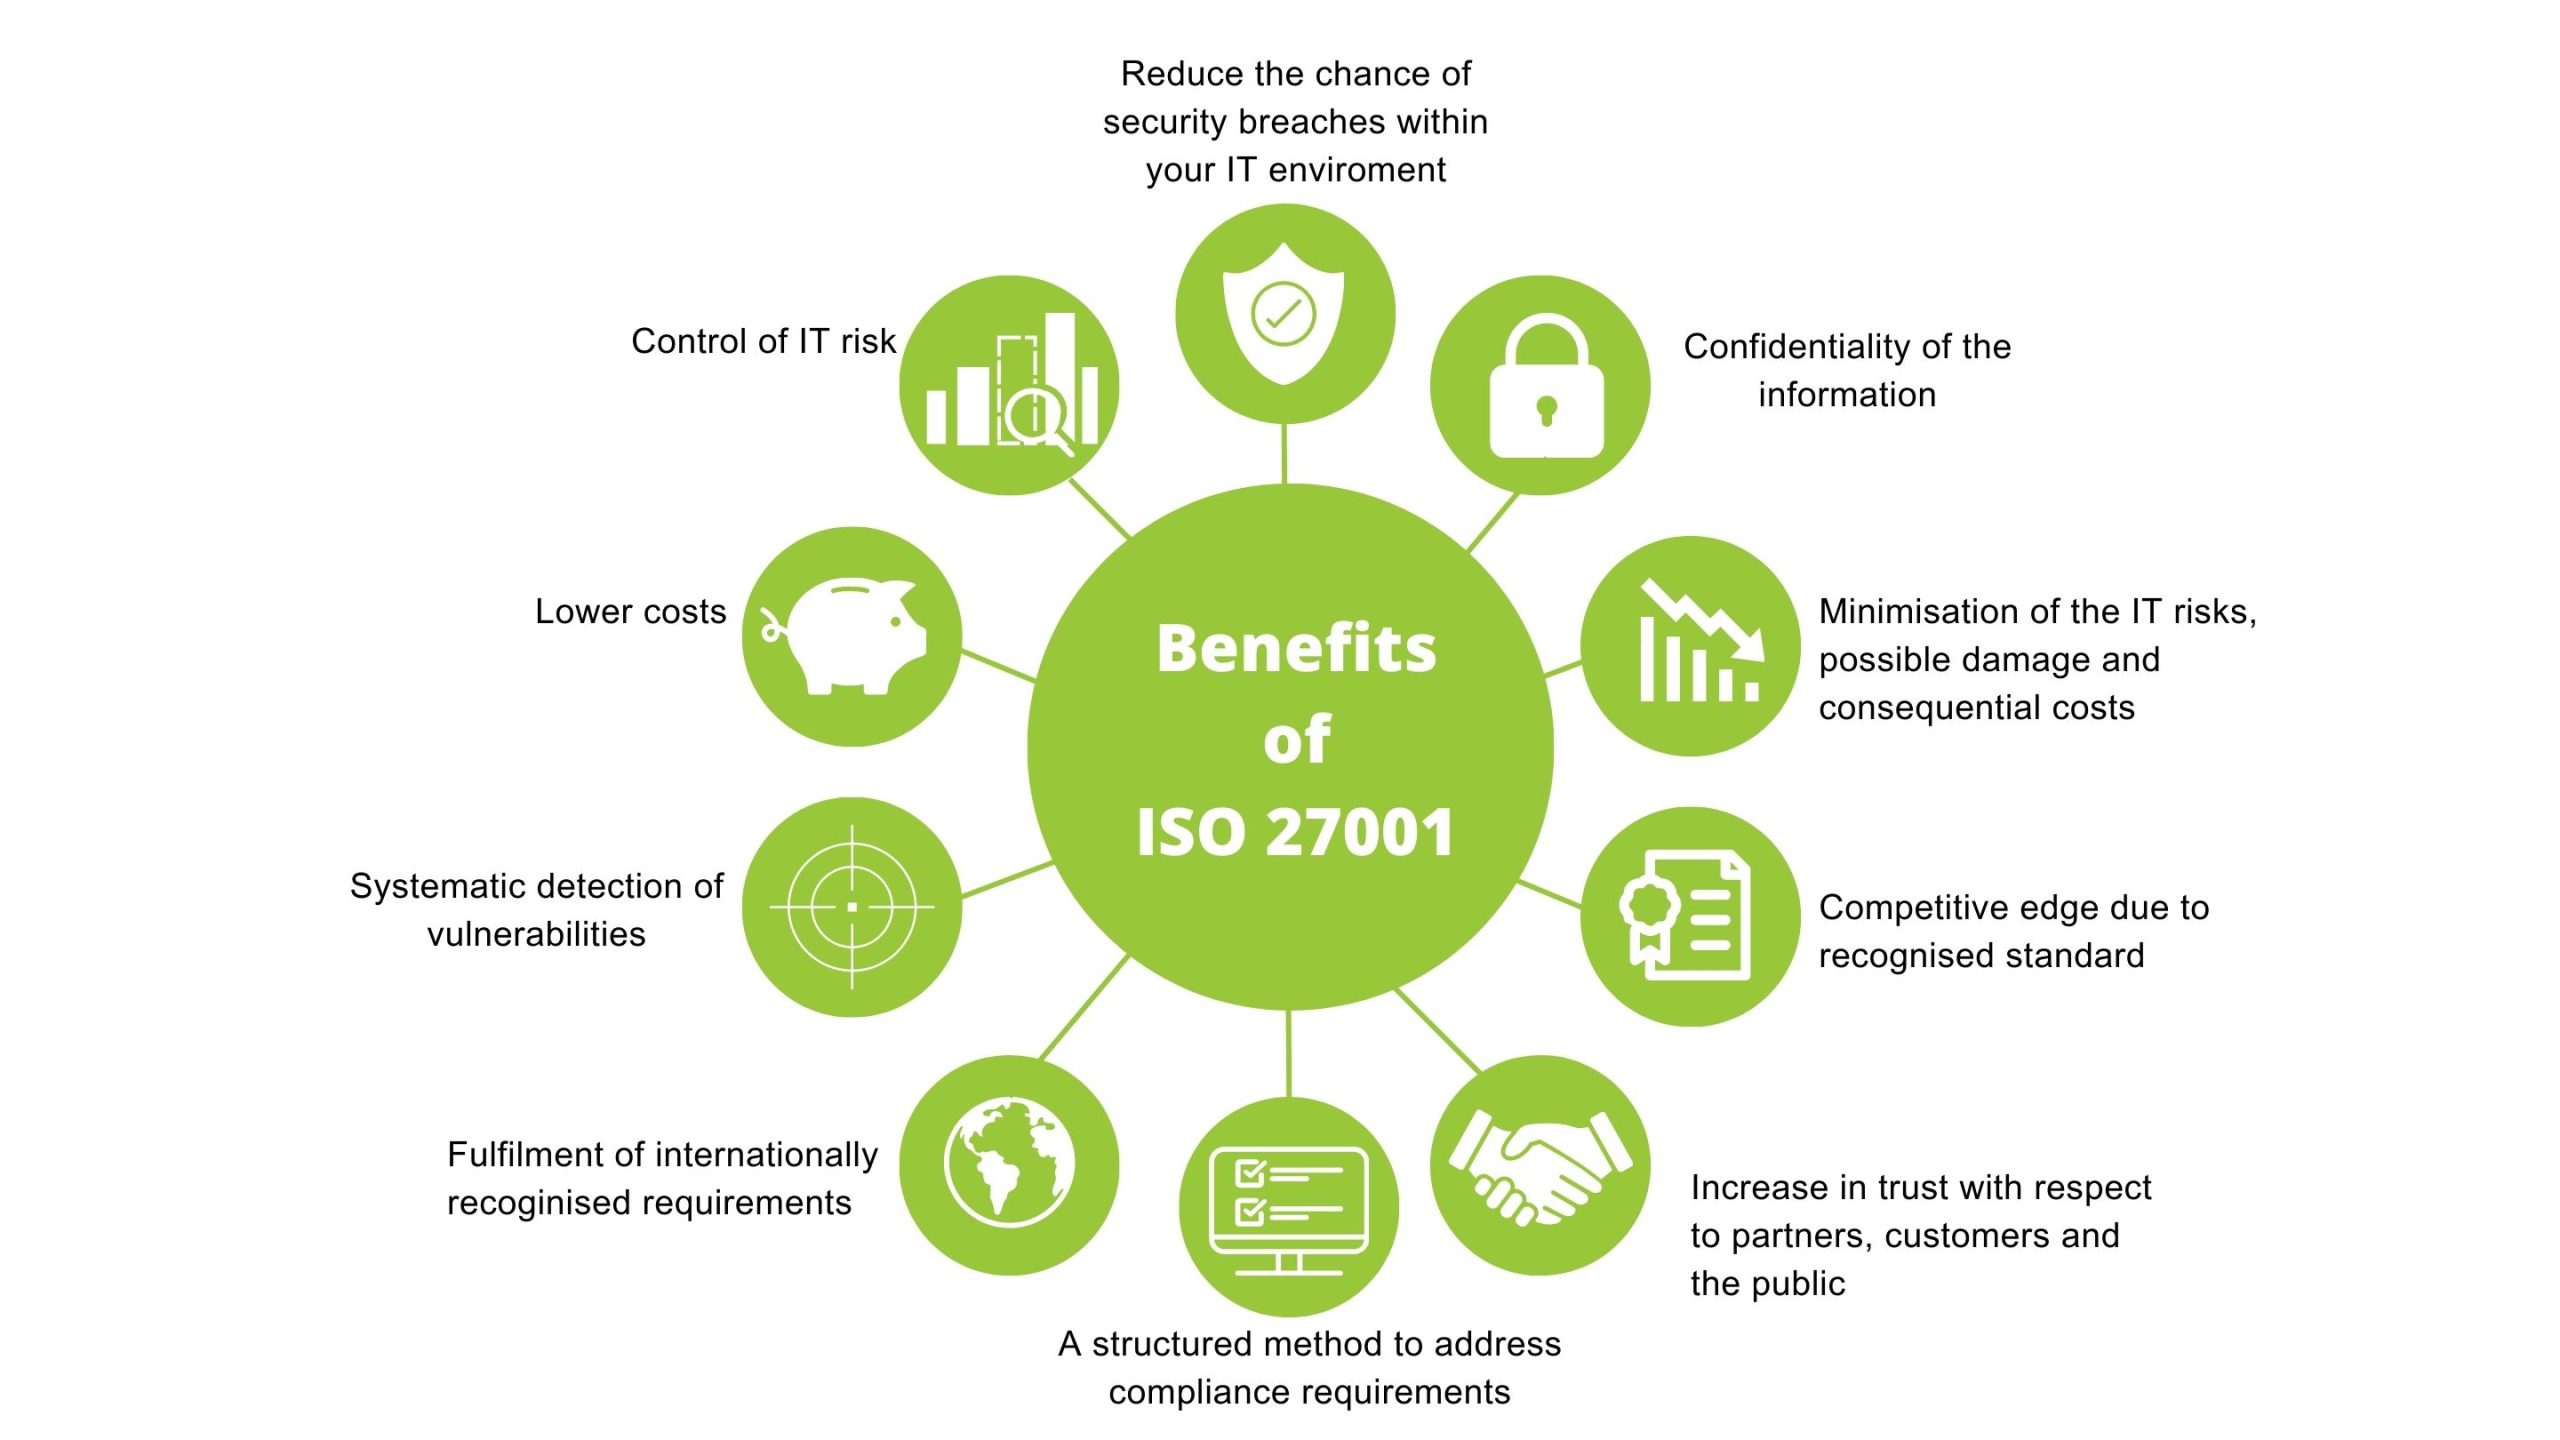 Spider diagram of benefits of ISO 27001